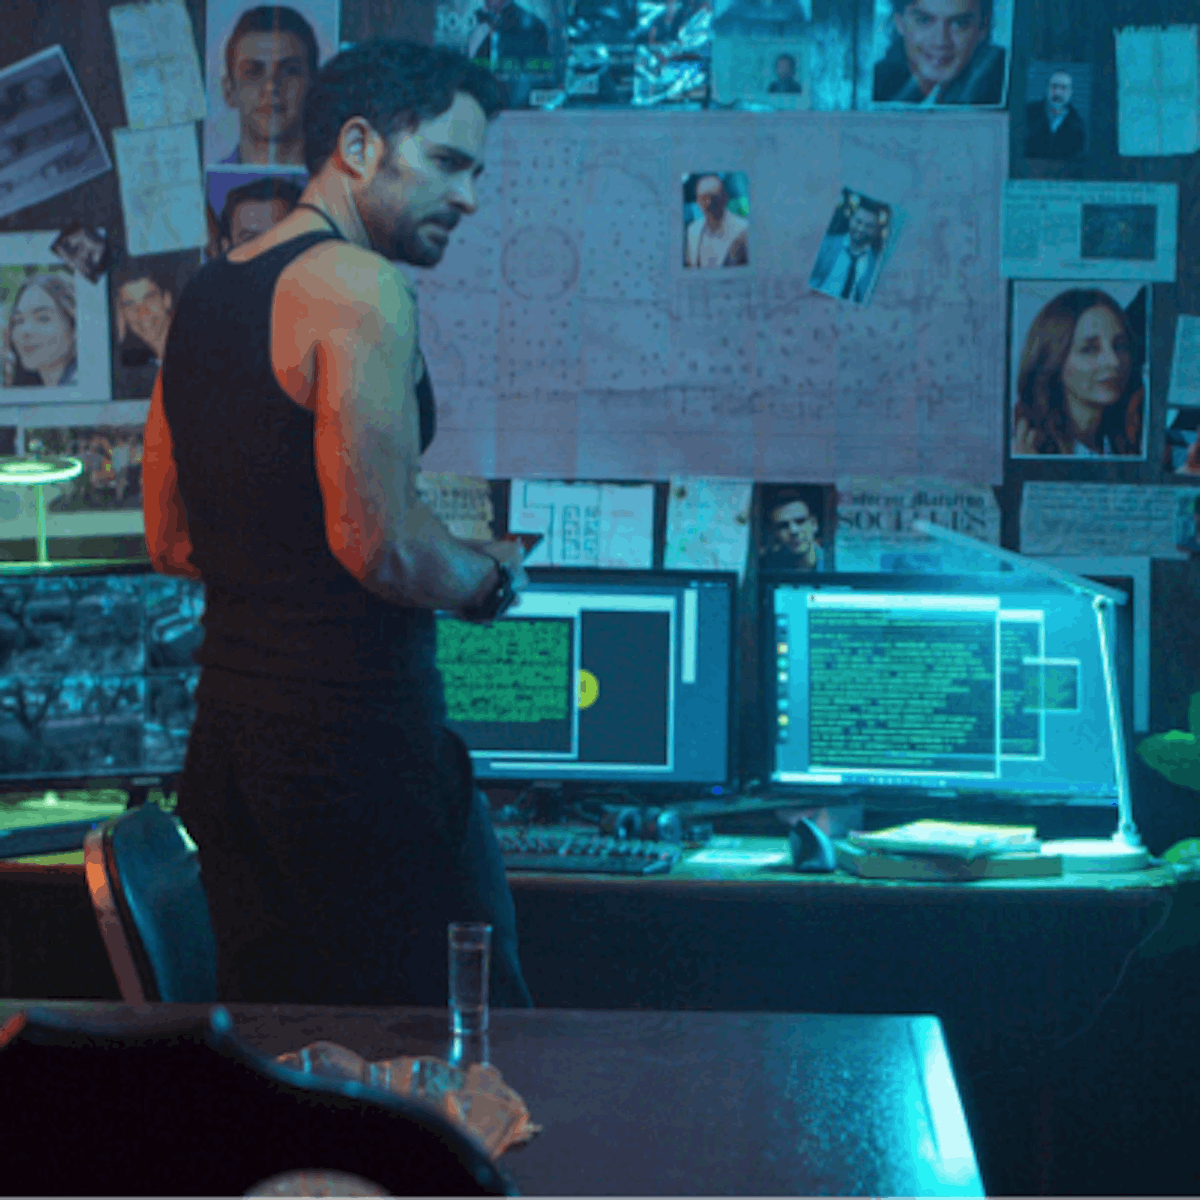 A man stands in front of a display of computers, pictures taped to the wall, and a map. He wears a black tank top and black pants, and has a sinister look on his face. There are plants flanking the table, and the room is lit with eerie blue light.